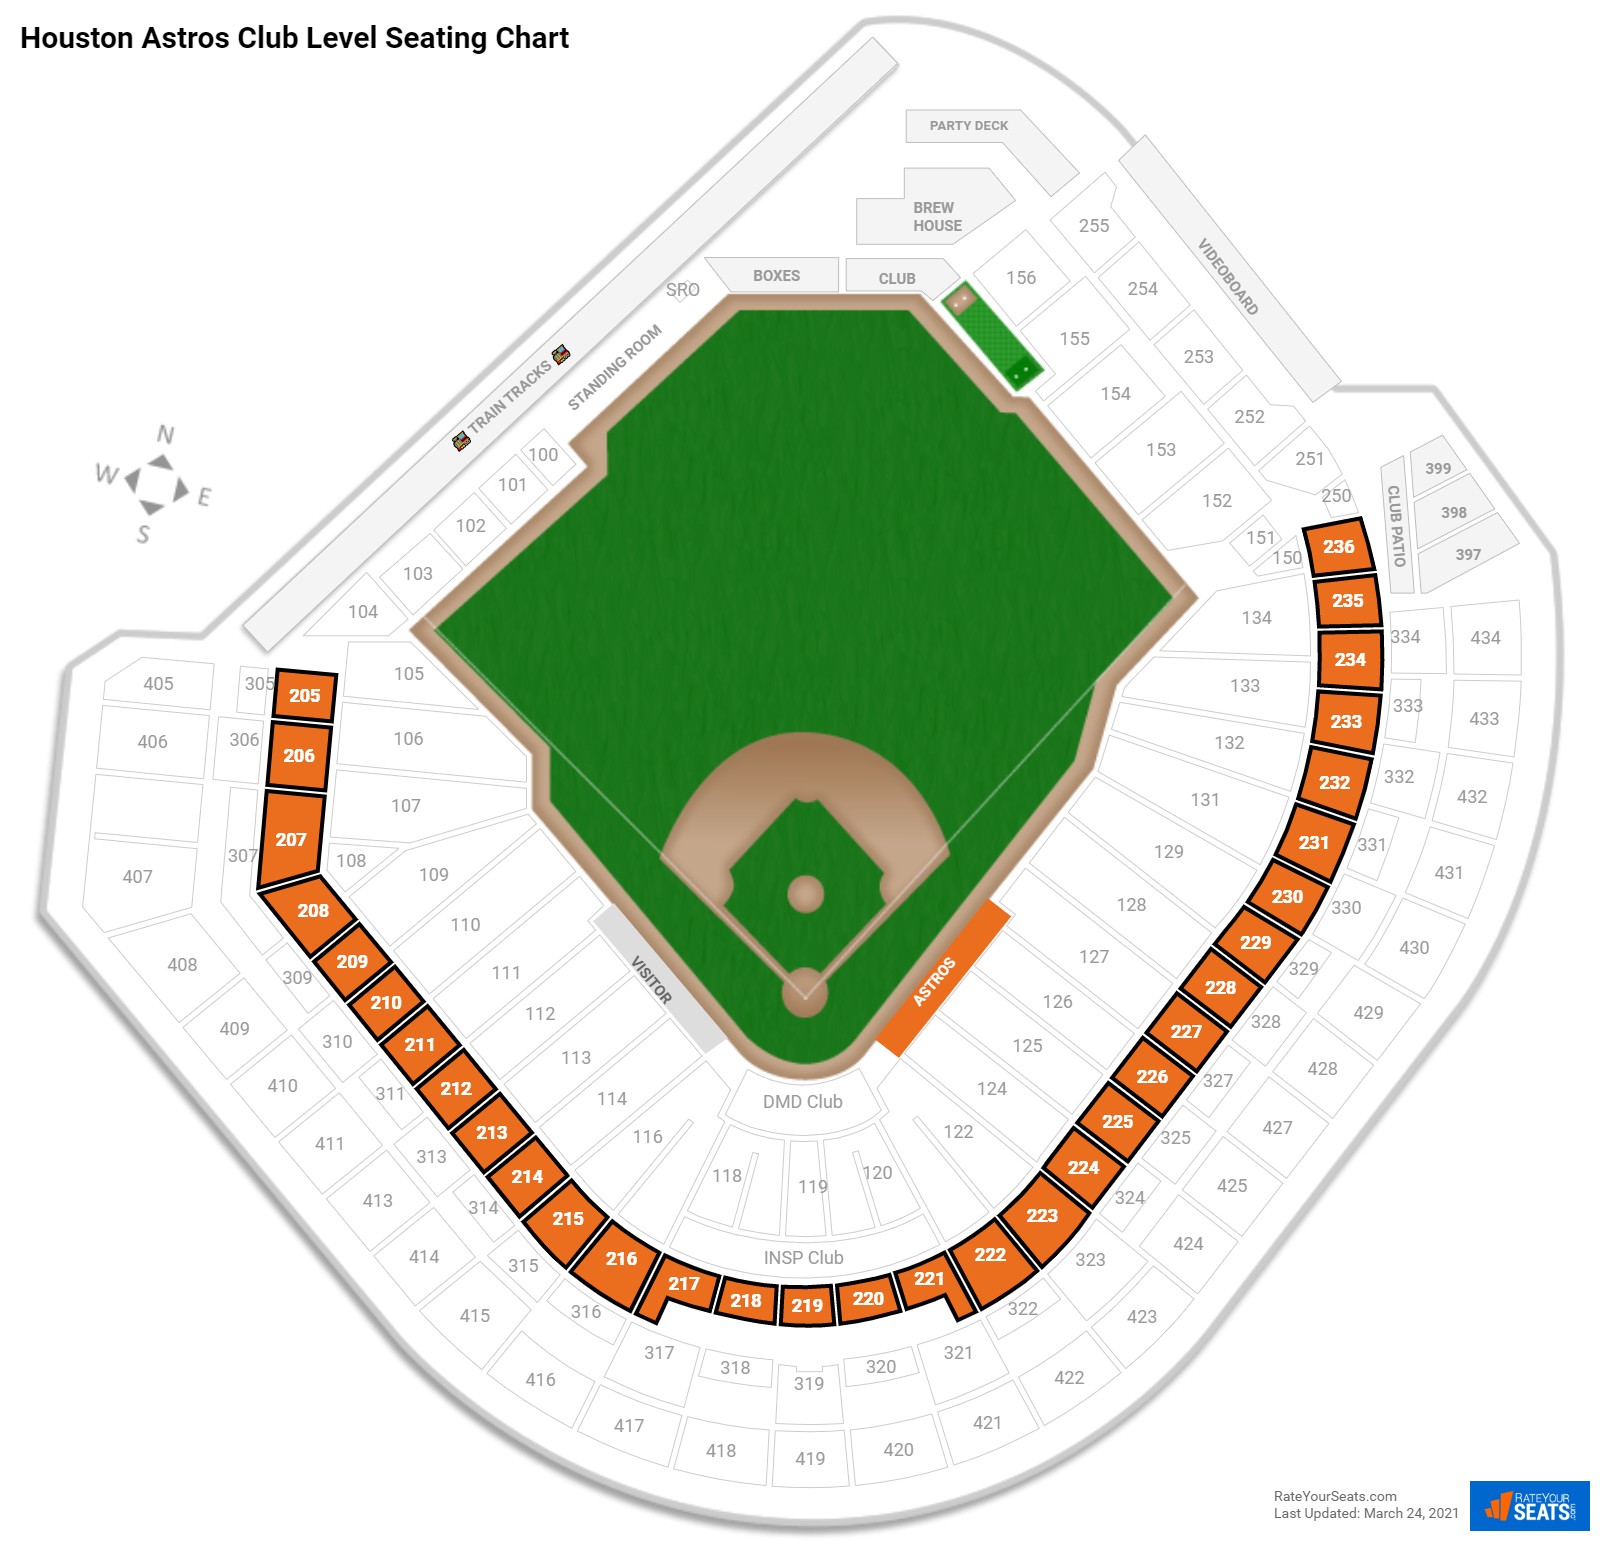 Astros Seating Chart And Prices